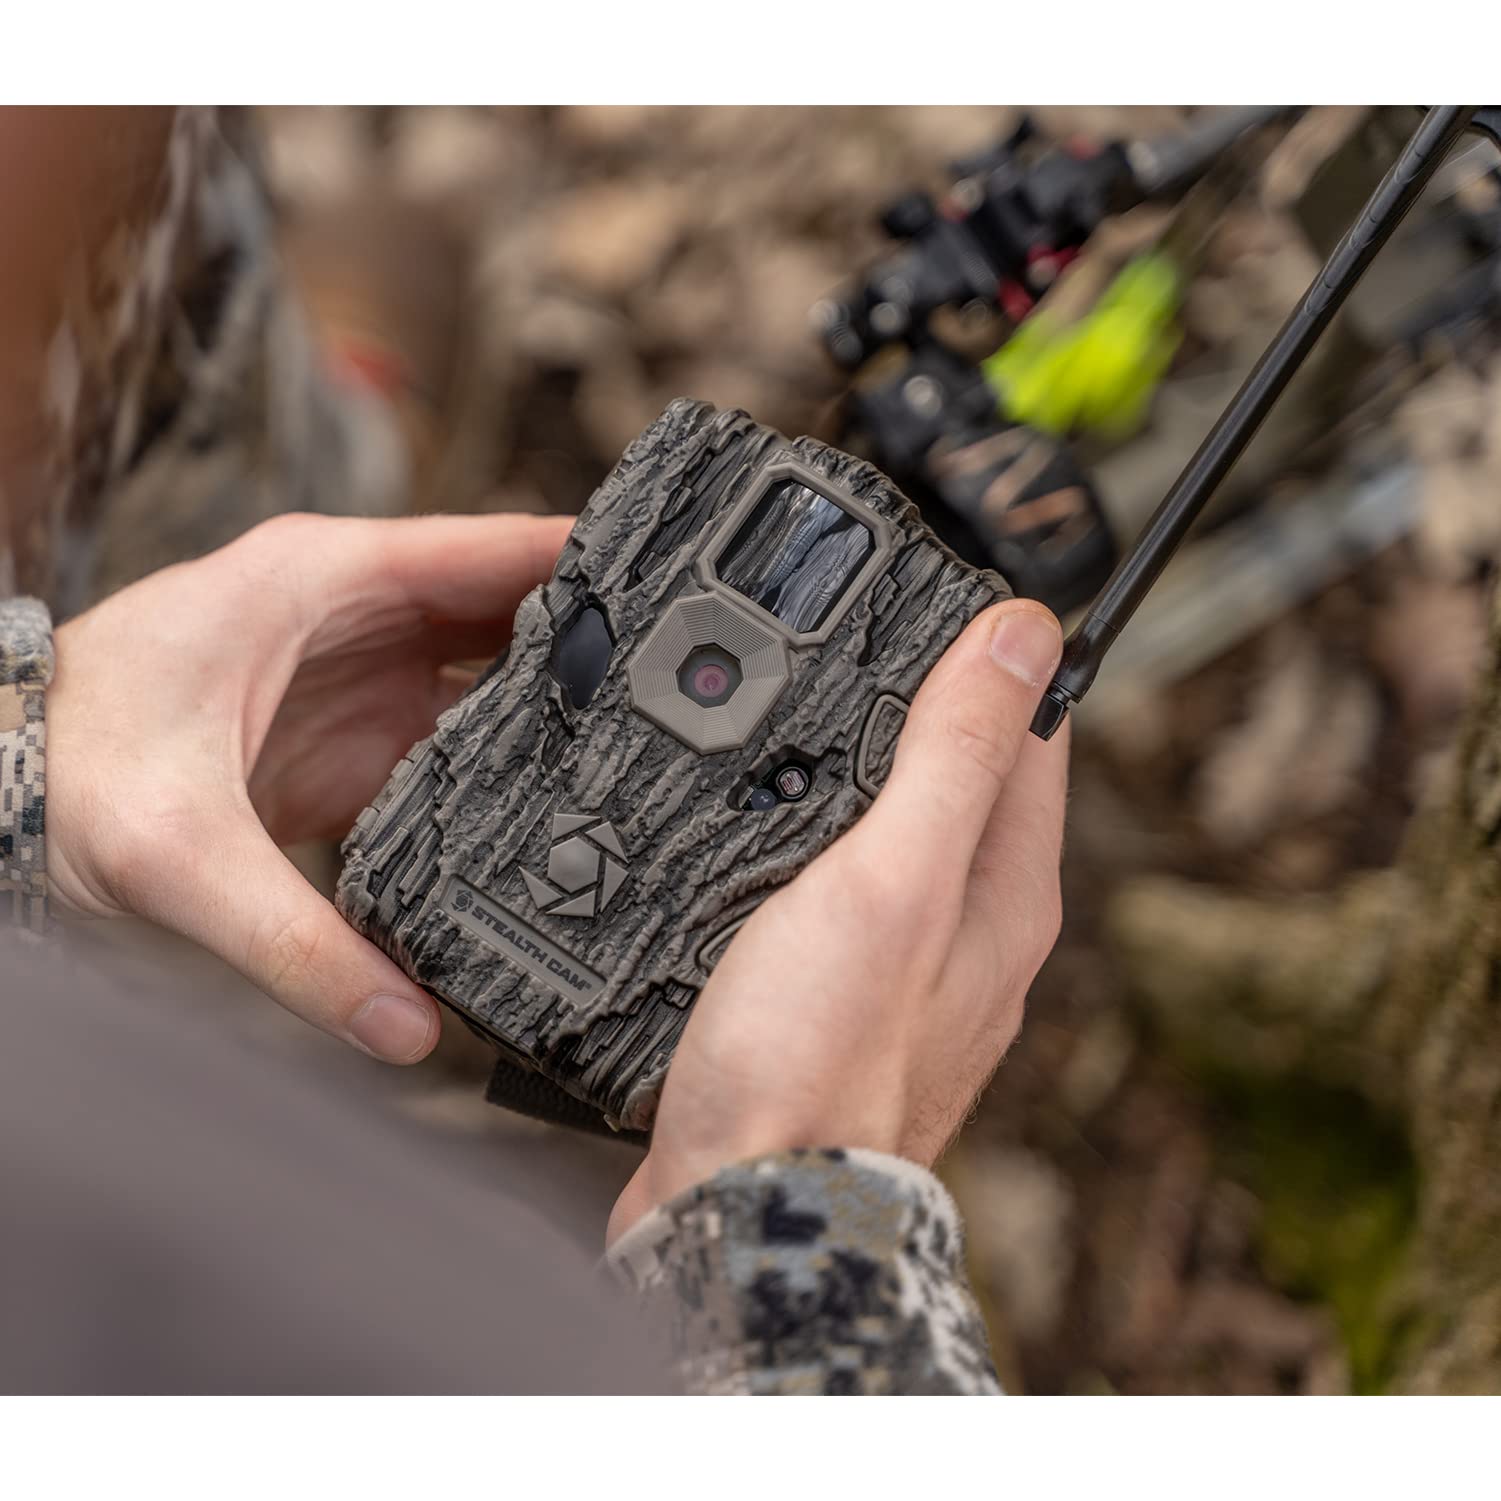 Stealth Cam Fusion-X and Fusion X-Pro Cellular Trail Cameras